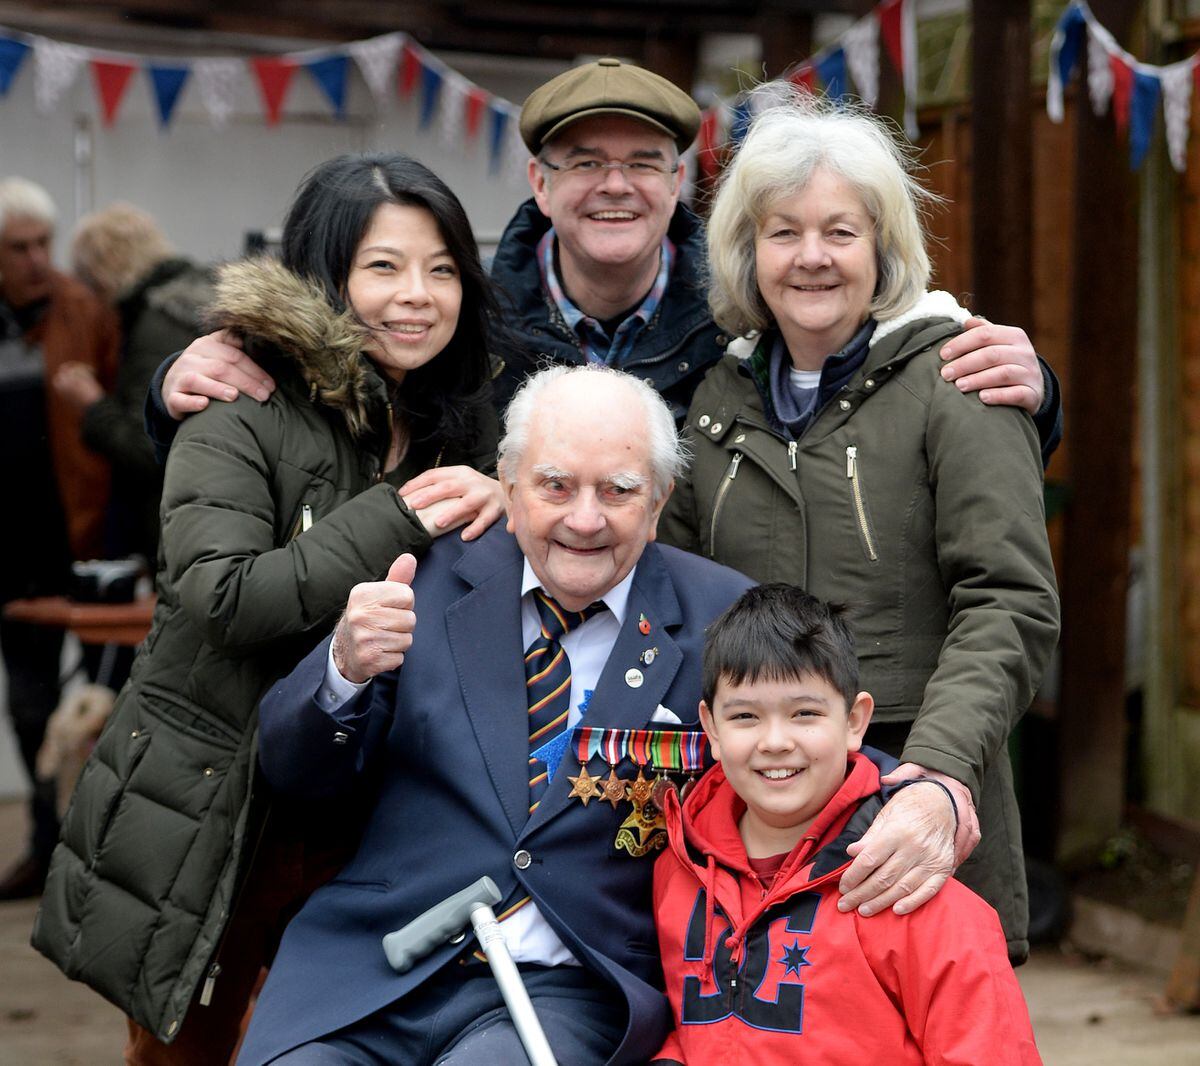 George with his family at his 100th birthday party earlier this year